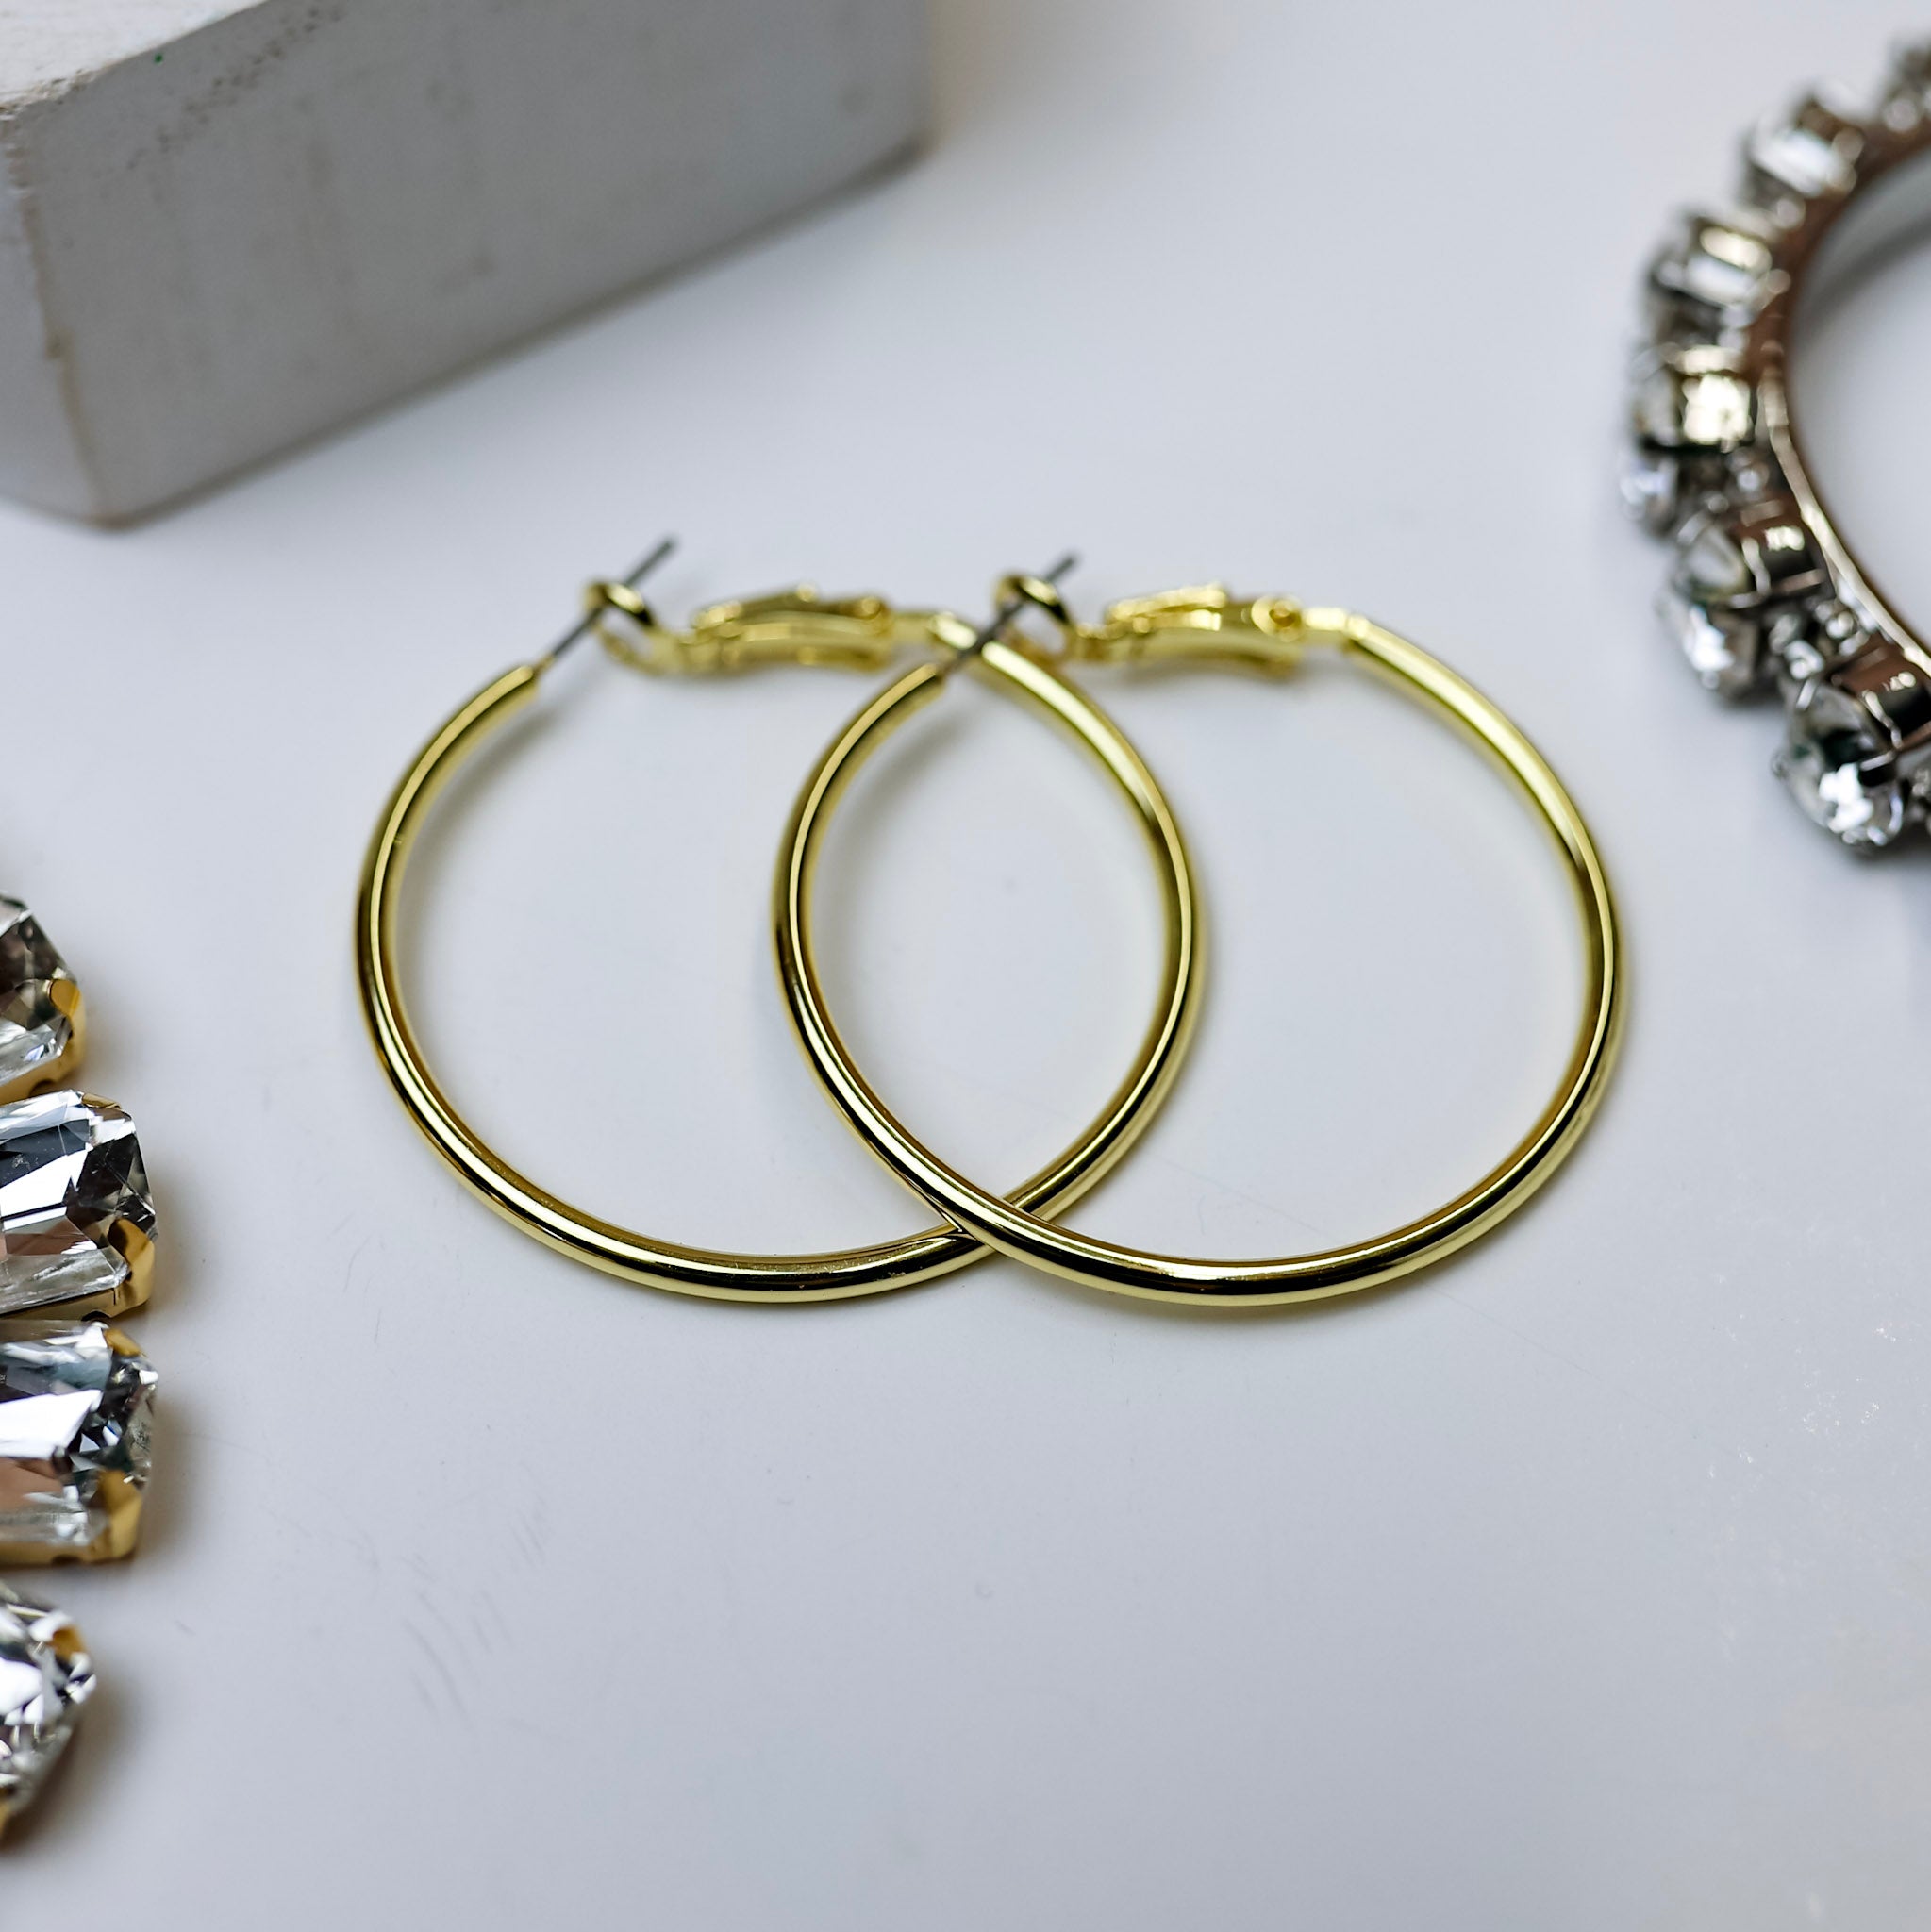 Sorrelli | Dahlia Hoop Earrings in Bright Gold Tone - Giddy Up Glamour Boutique